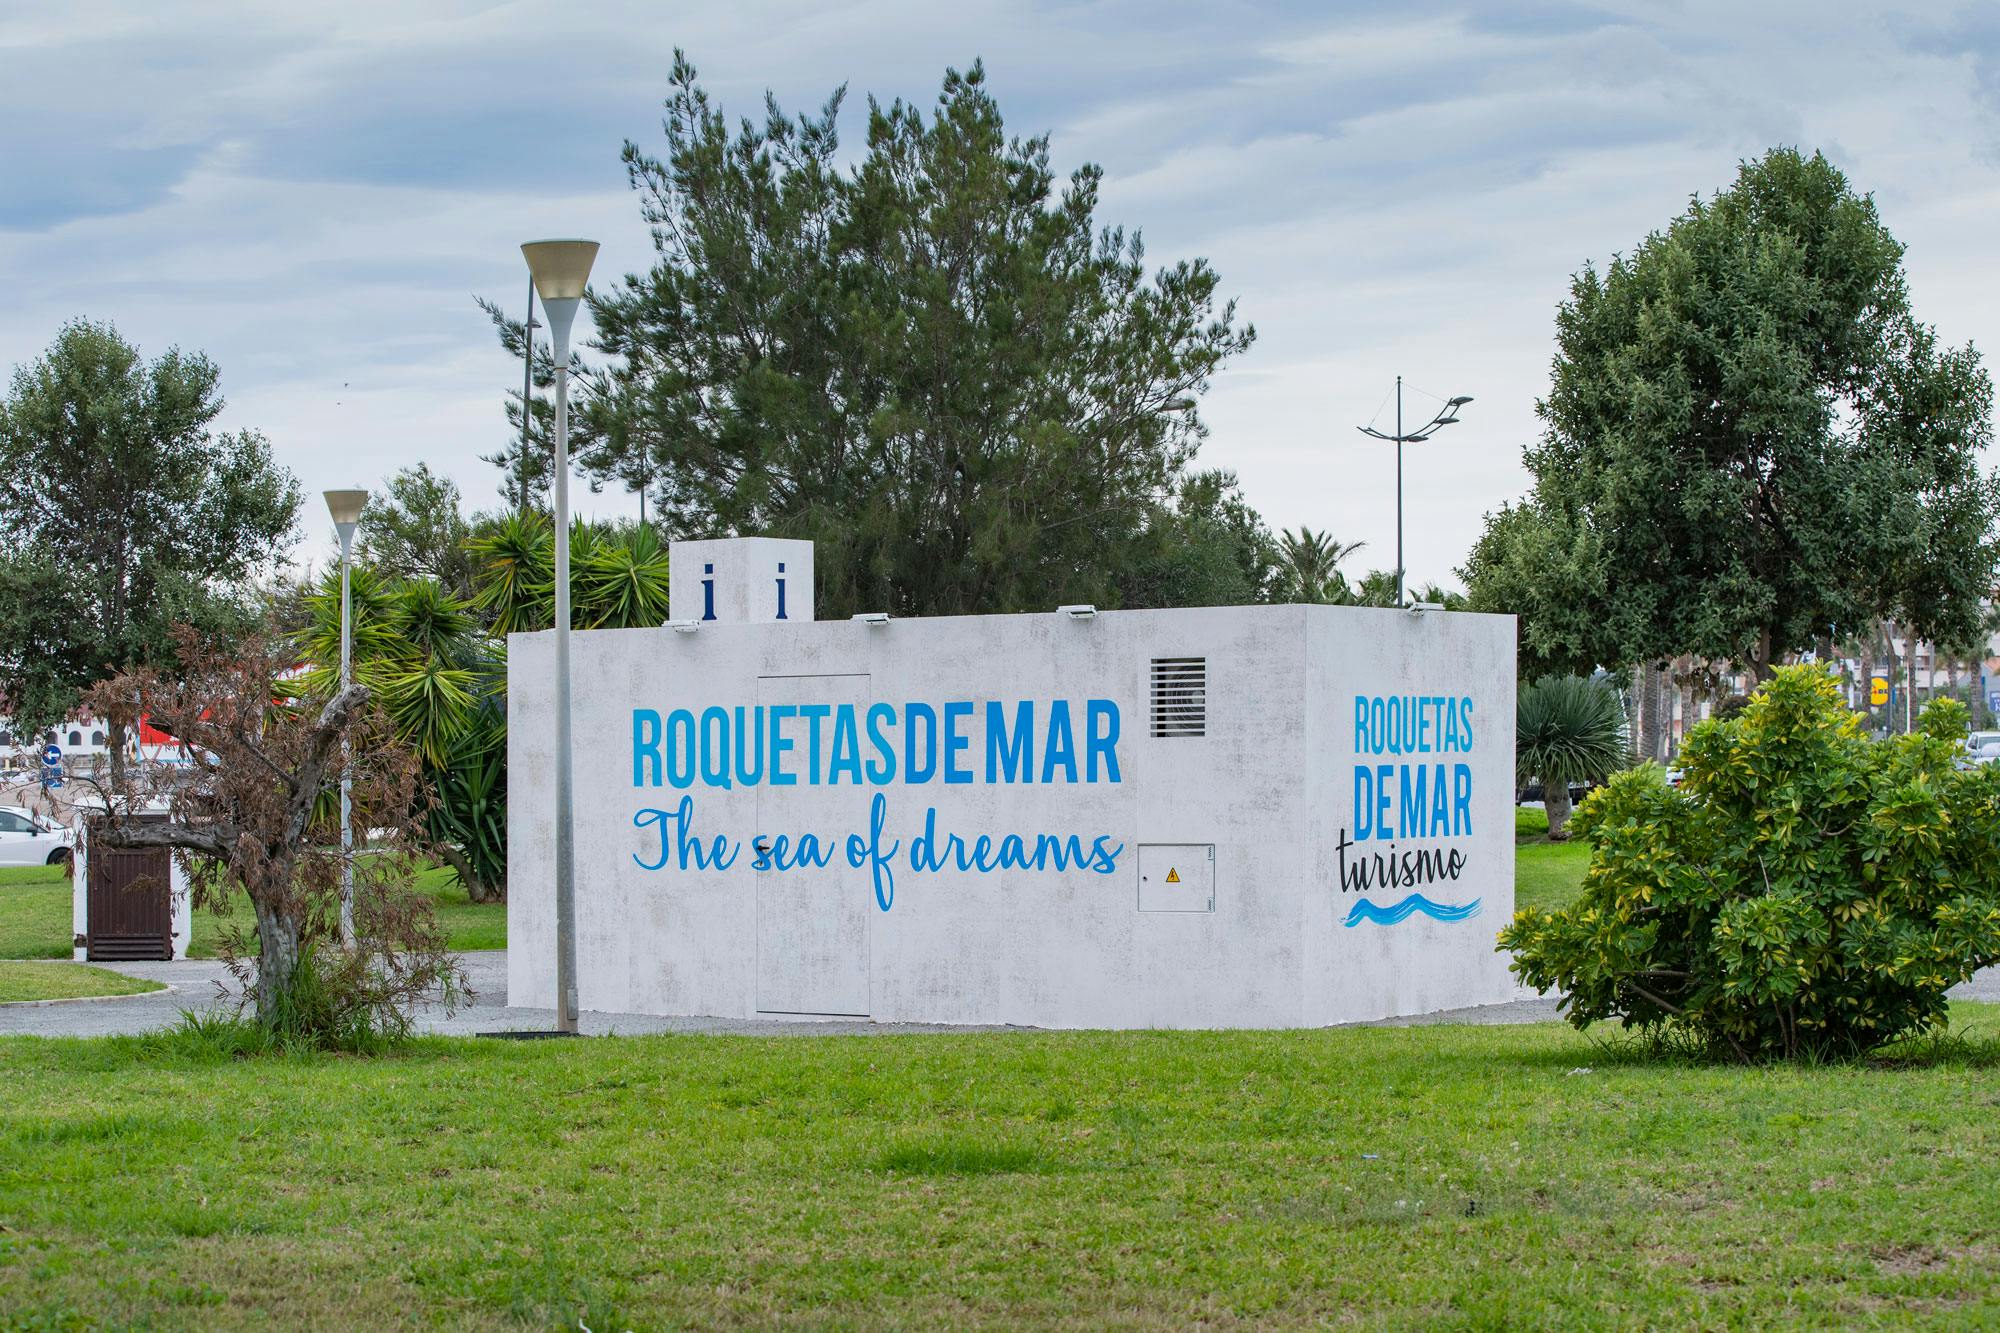 Image number 35 of the current section of A dialogue between past, present and future takes place at the Museo/Espacio Histórico in Roquetas de Mar, a building with a very unique façade in Cosentino Australia